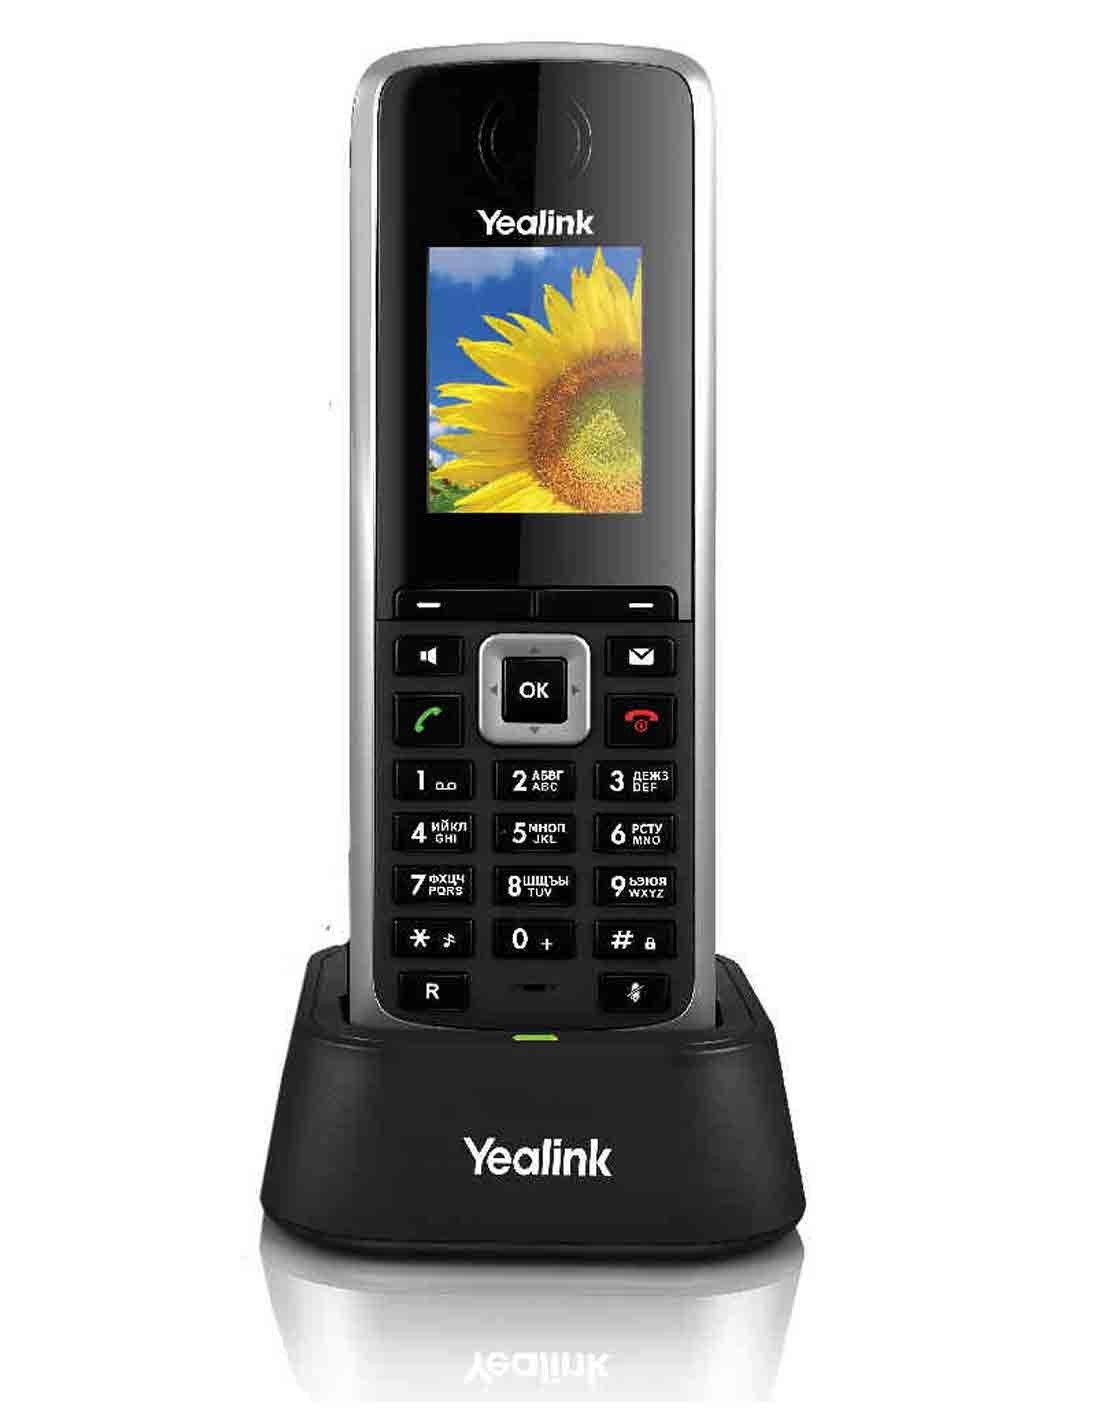 Yealink W52H DECT Cordless Handset Dubai Online Store with best deal options